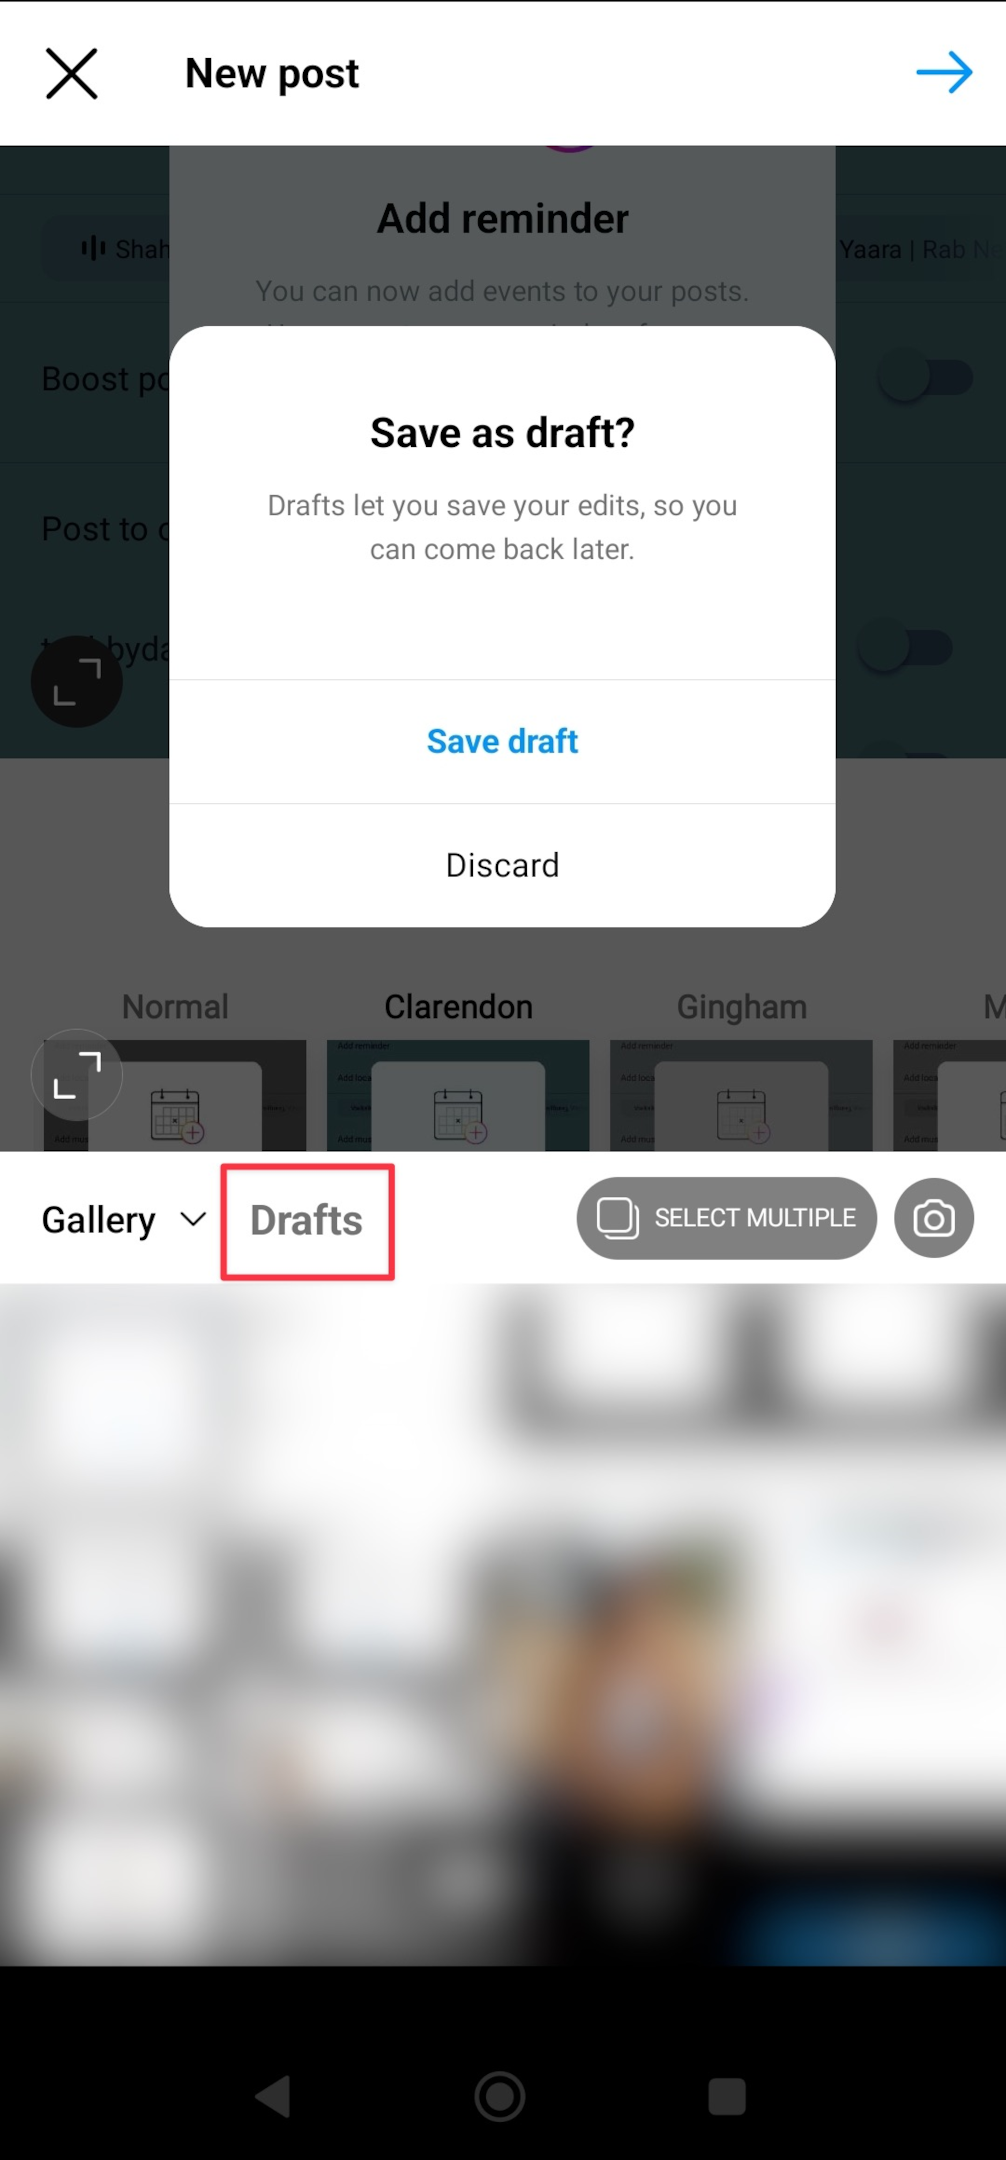 Remote.tools shows how to access drafts tab on Instagram for Android app